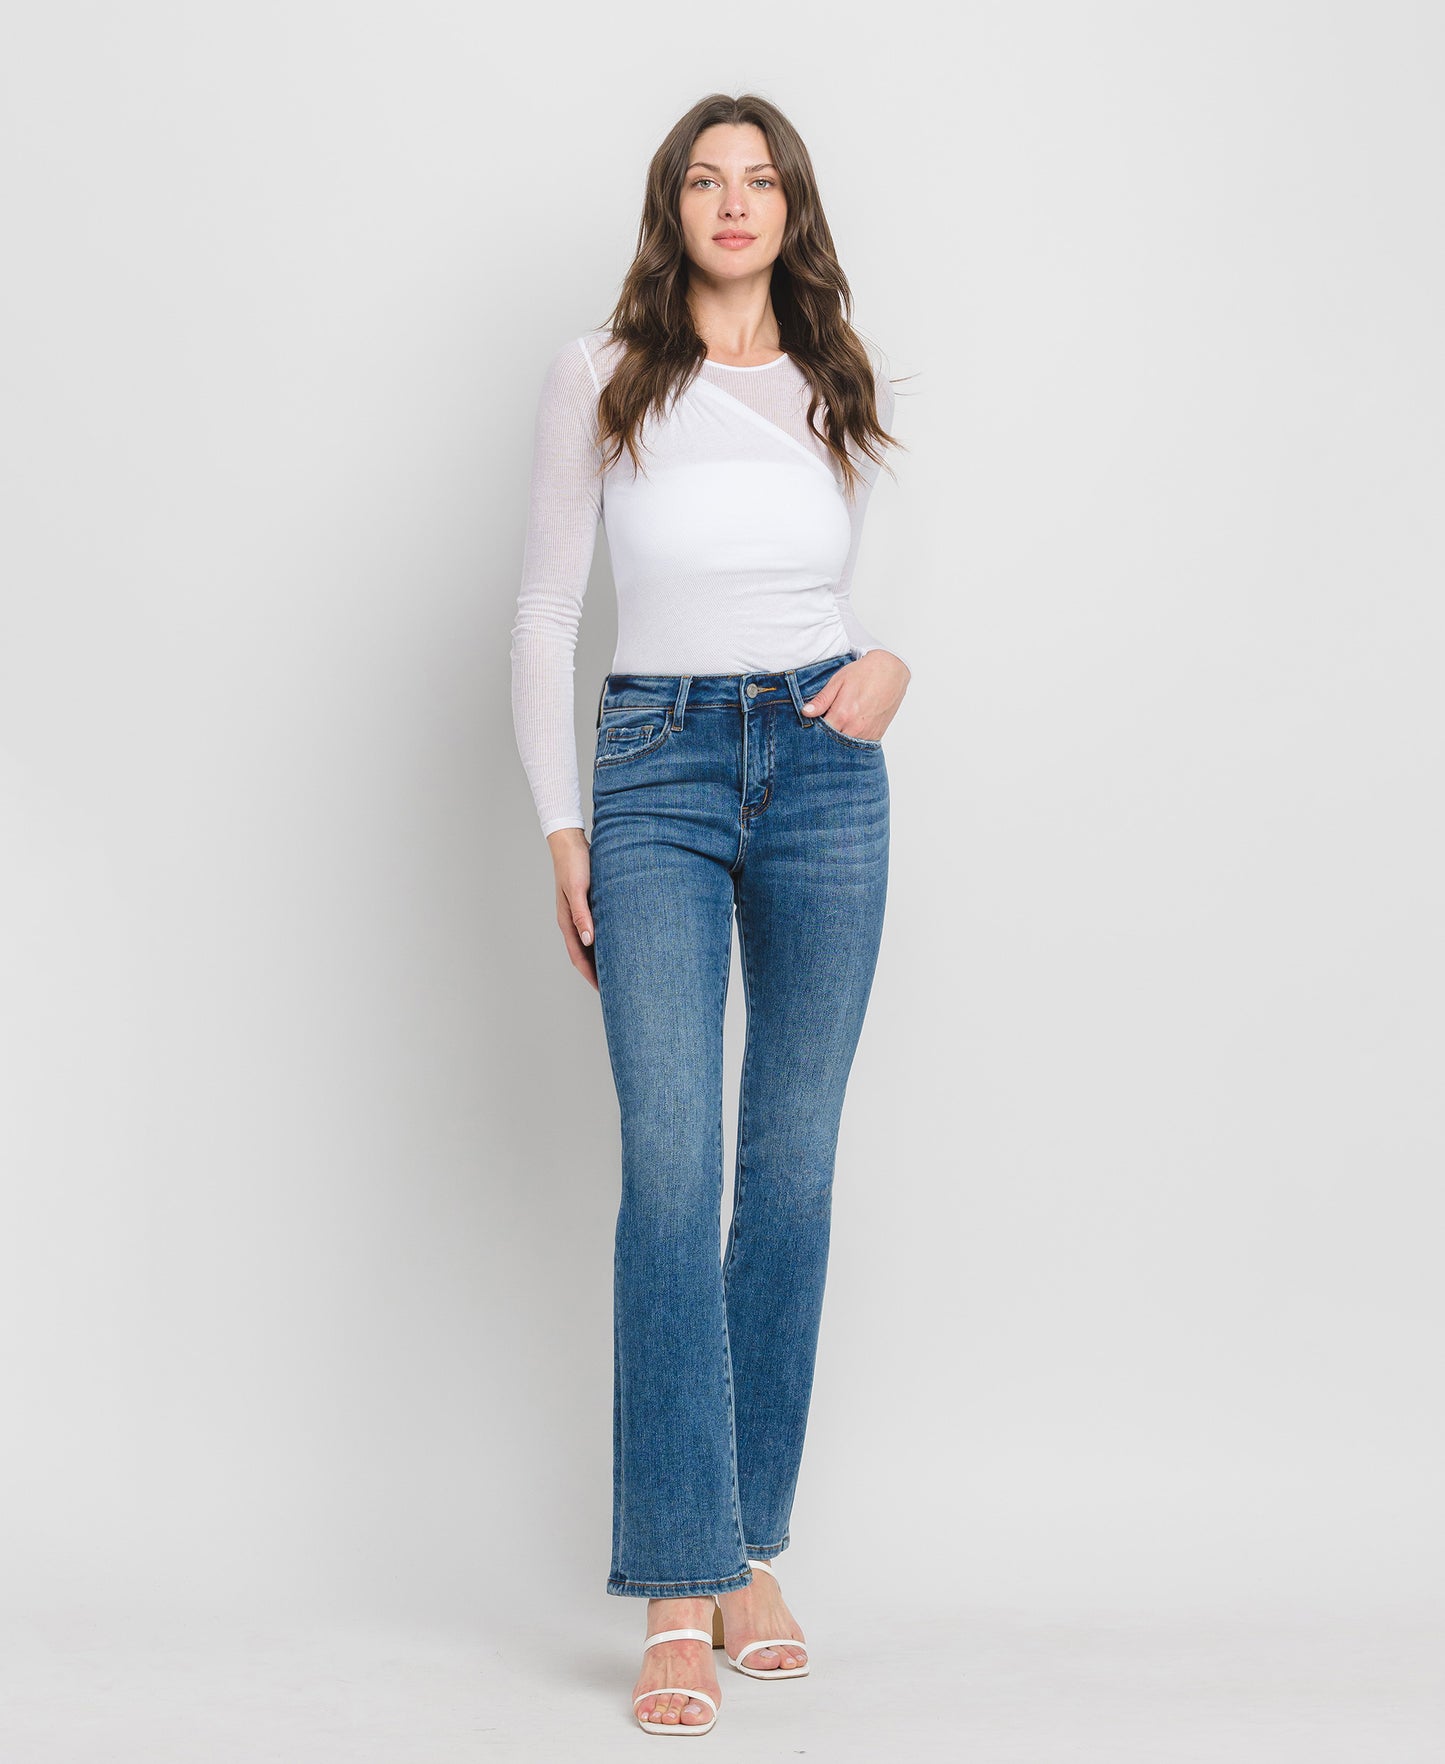 Front product images of Shining - High Rise Bootcut Jeans